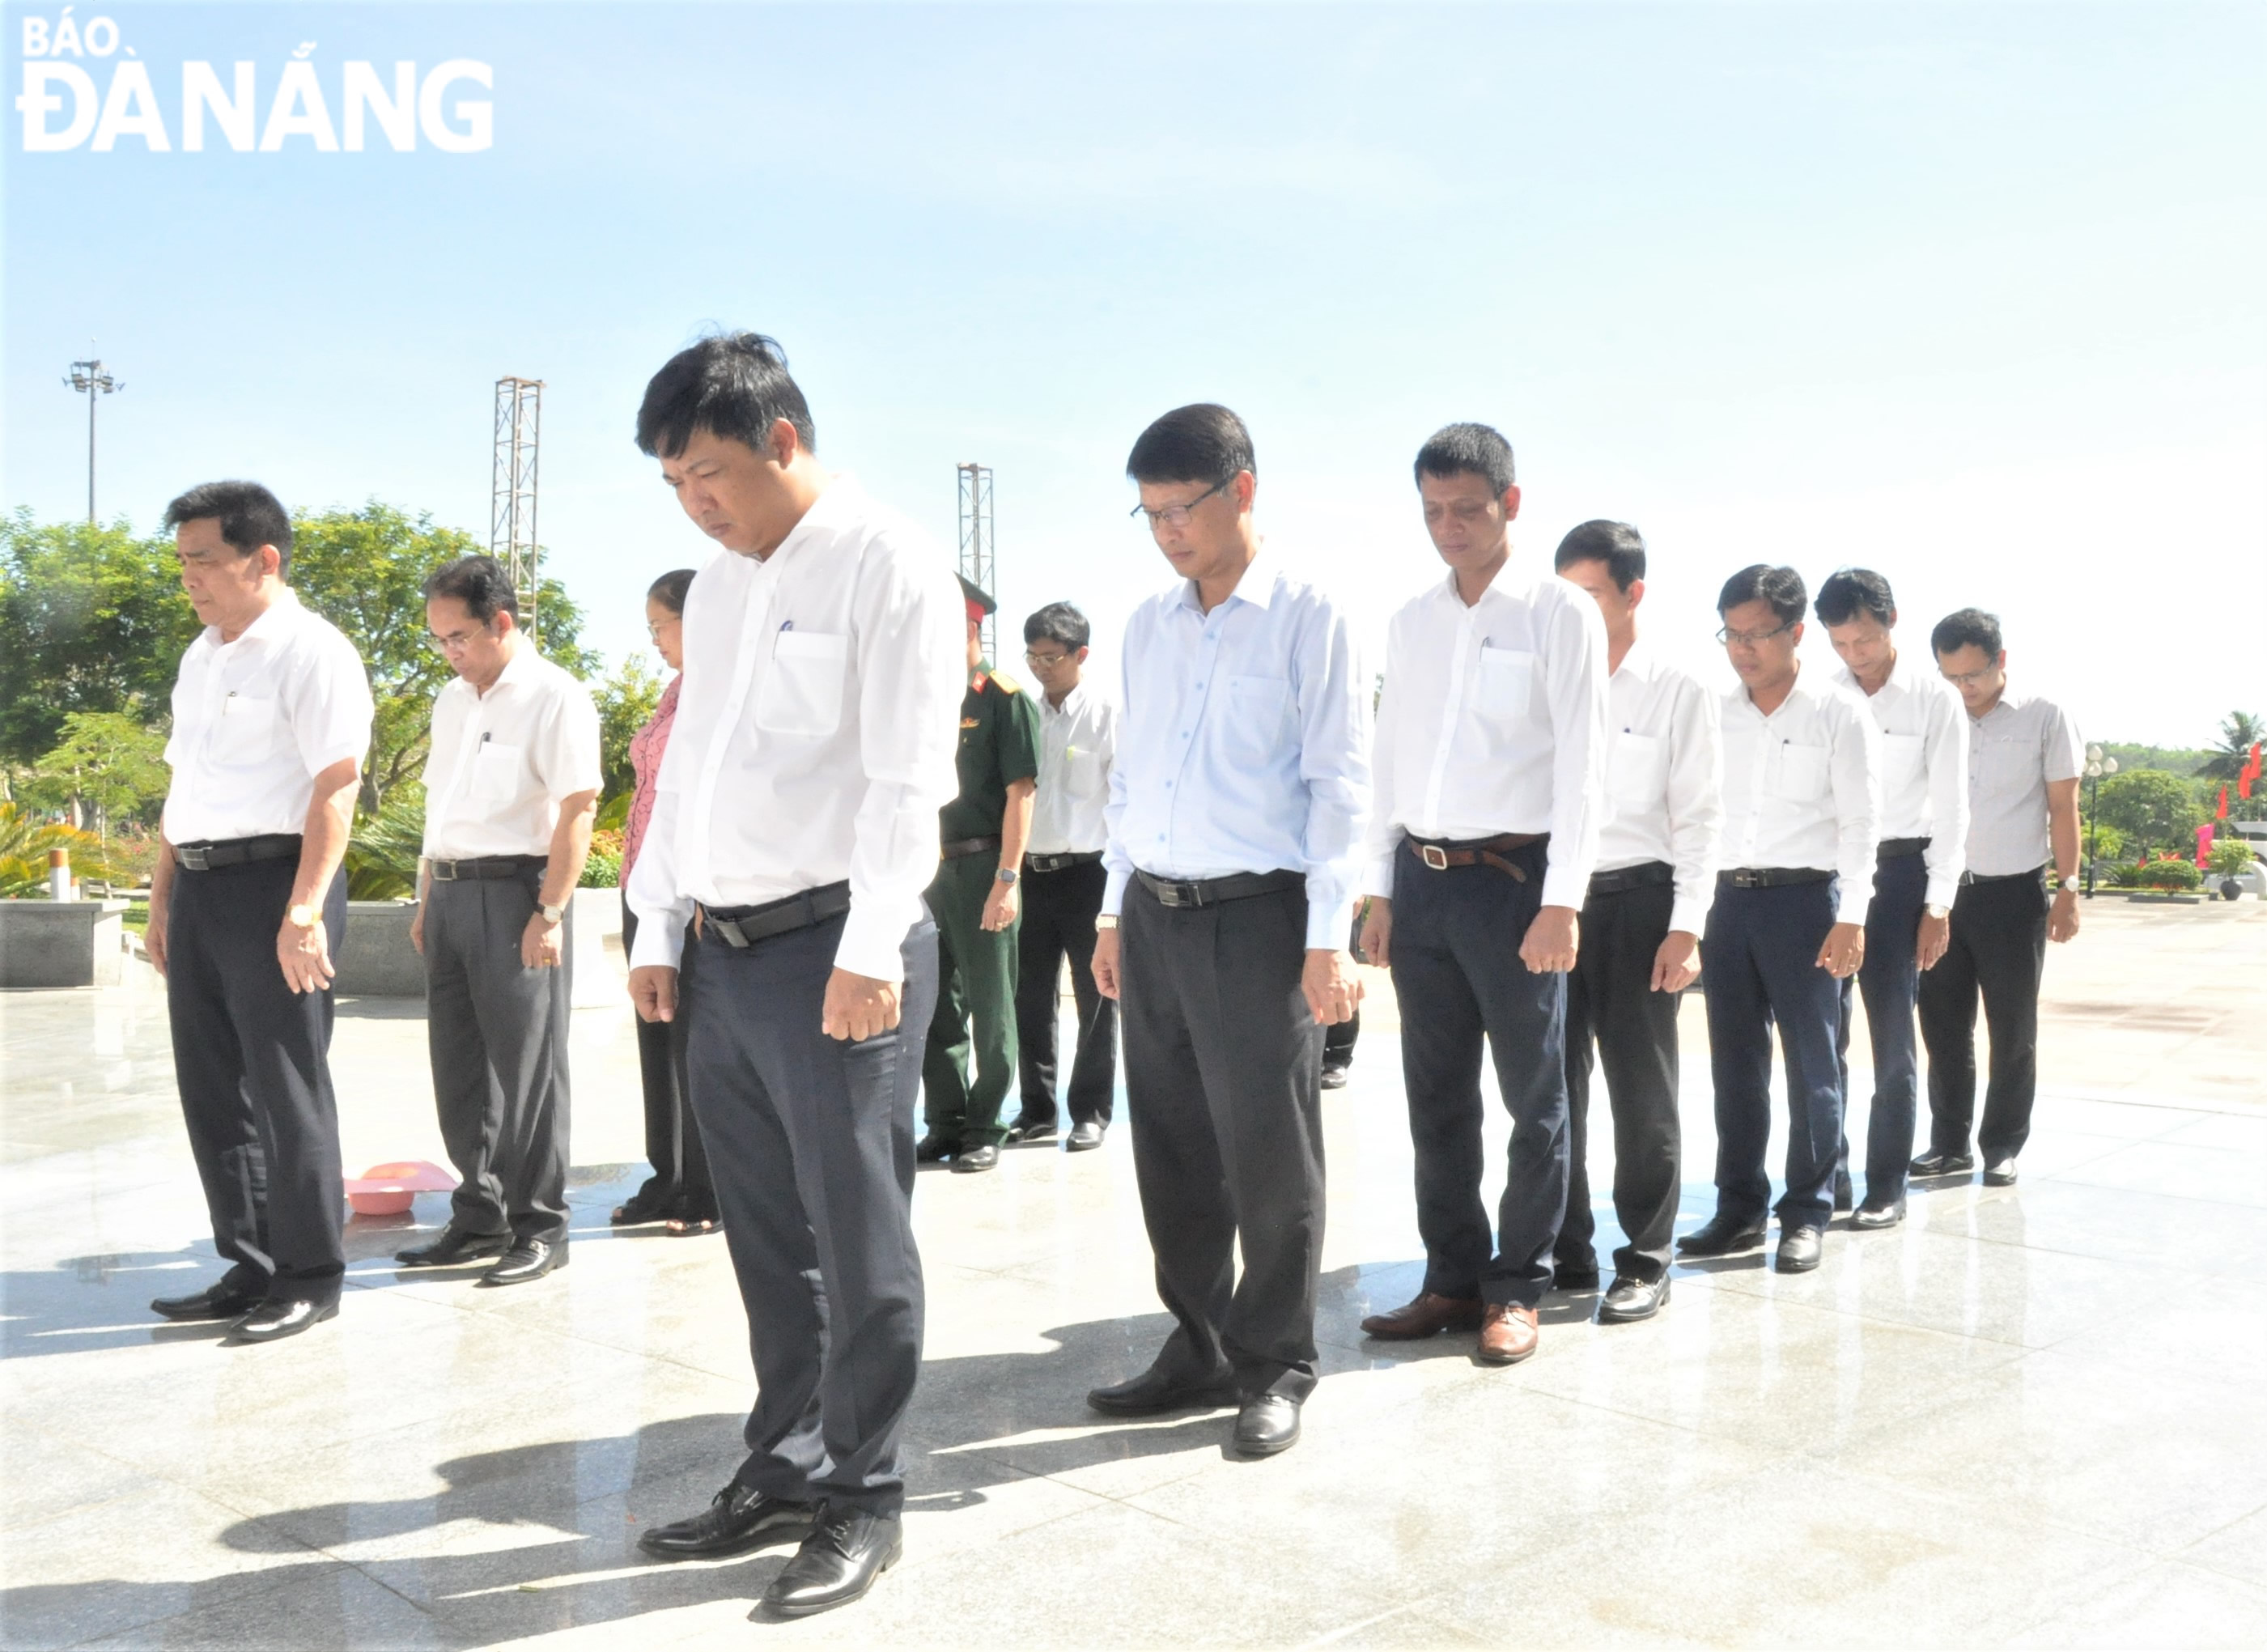 The delegation of Da Nang and Quang Nam Province leaders observing a one-minute moment of silence in memory of heroic Vietnamese mothers and martyrs at the Martyrs' Cemetery in Quang Nam Province. Photo: LE HUNG